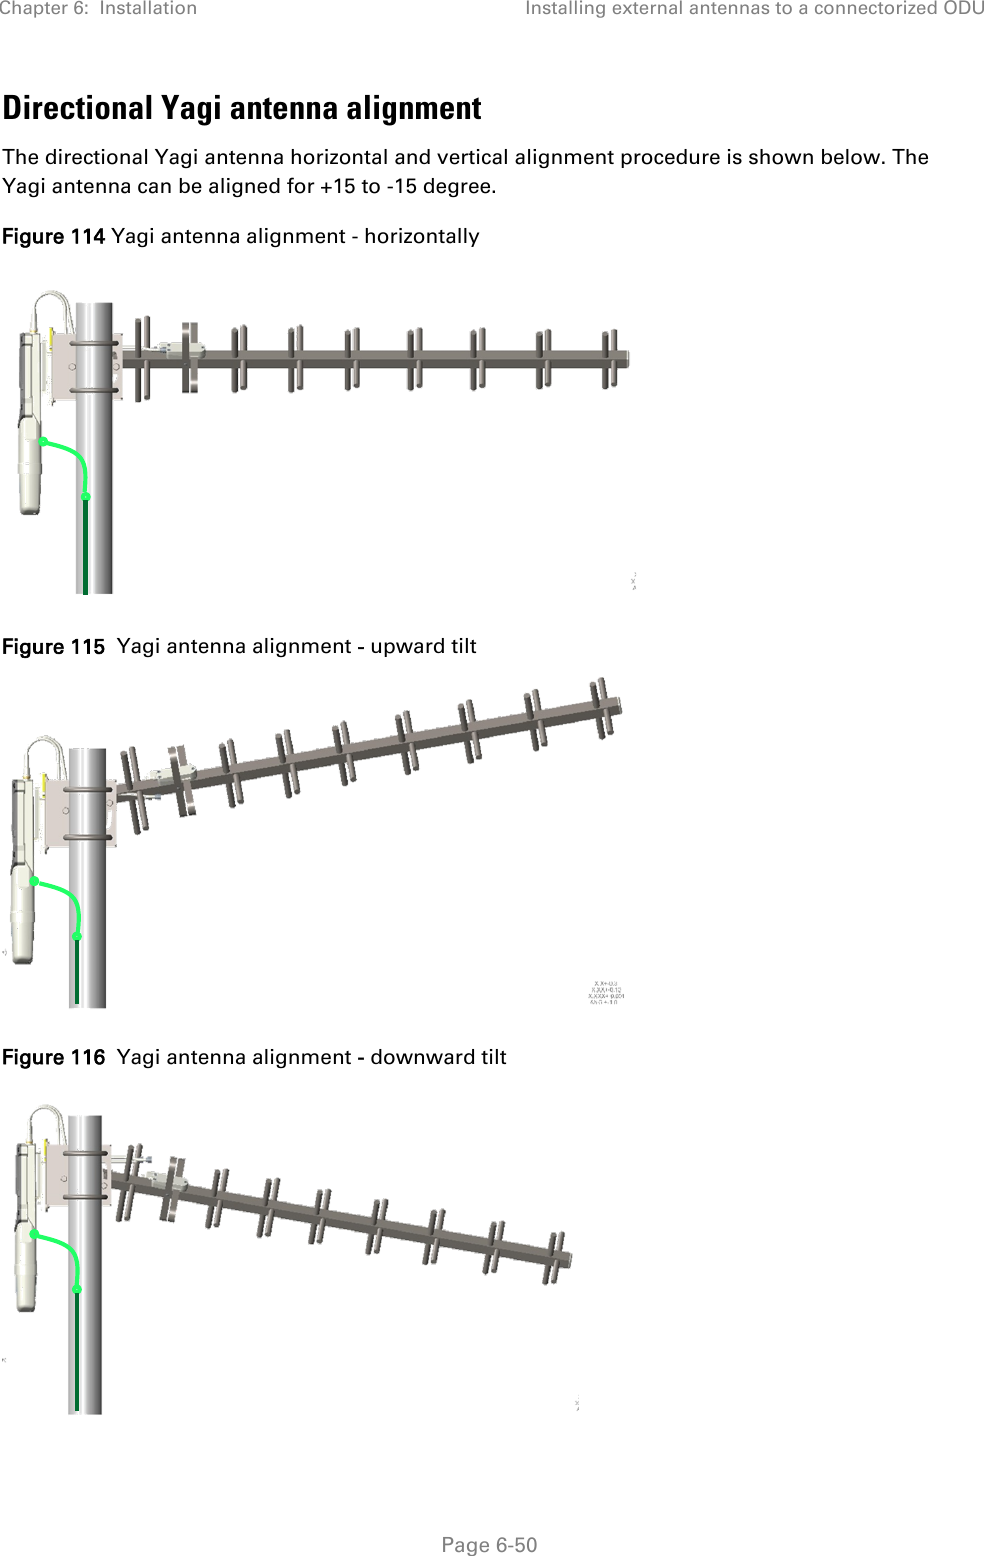 Chapter 6:  Installation Installing external antennas to a connectorized ODU   Page 6-50 Directional Yagi antenna alignment  The directional Yagi antenna horizontal and vertical alignment procedure is shown below. The Yagi antenna can be aligned for +15 to -15 degree. Figure 114 Yagi antenna alignment - horizontally  Figure 115  Yagi antenna alignment - upward tilt  Figure 116  Yagi antenna alignment - downward tilt     